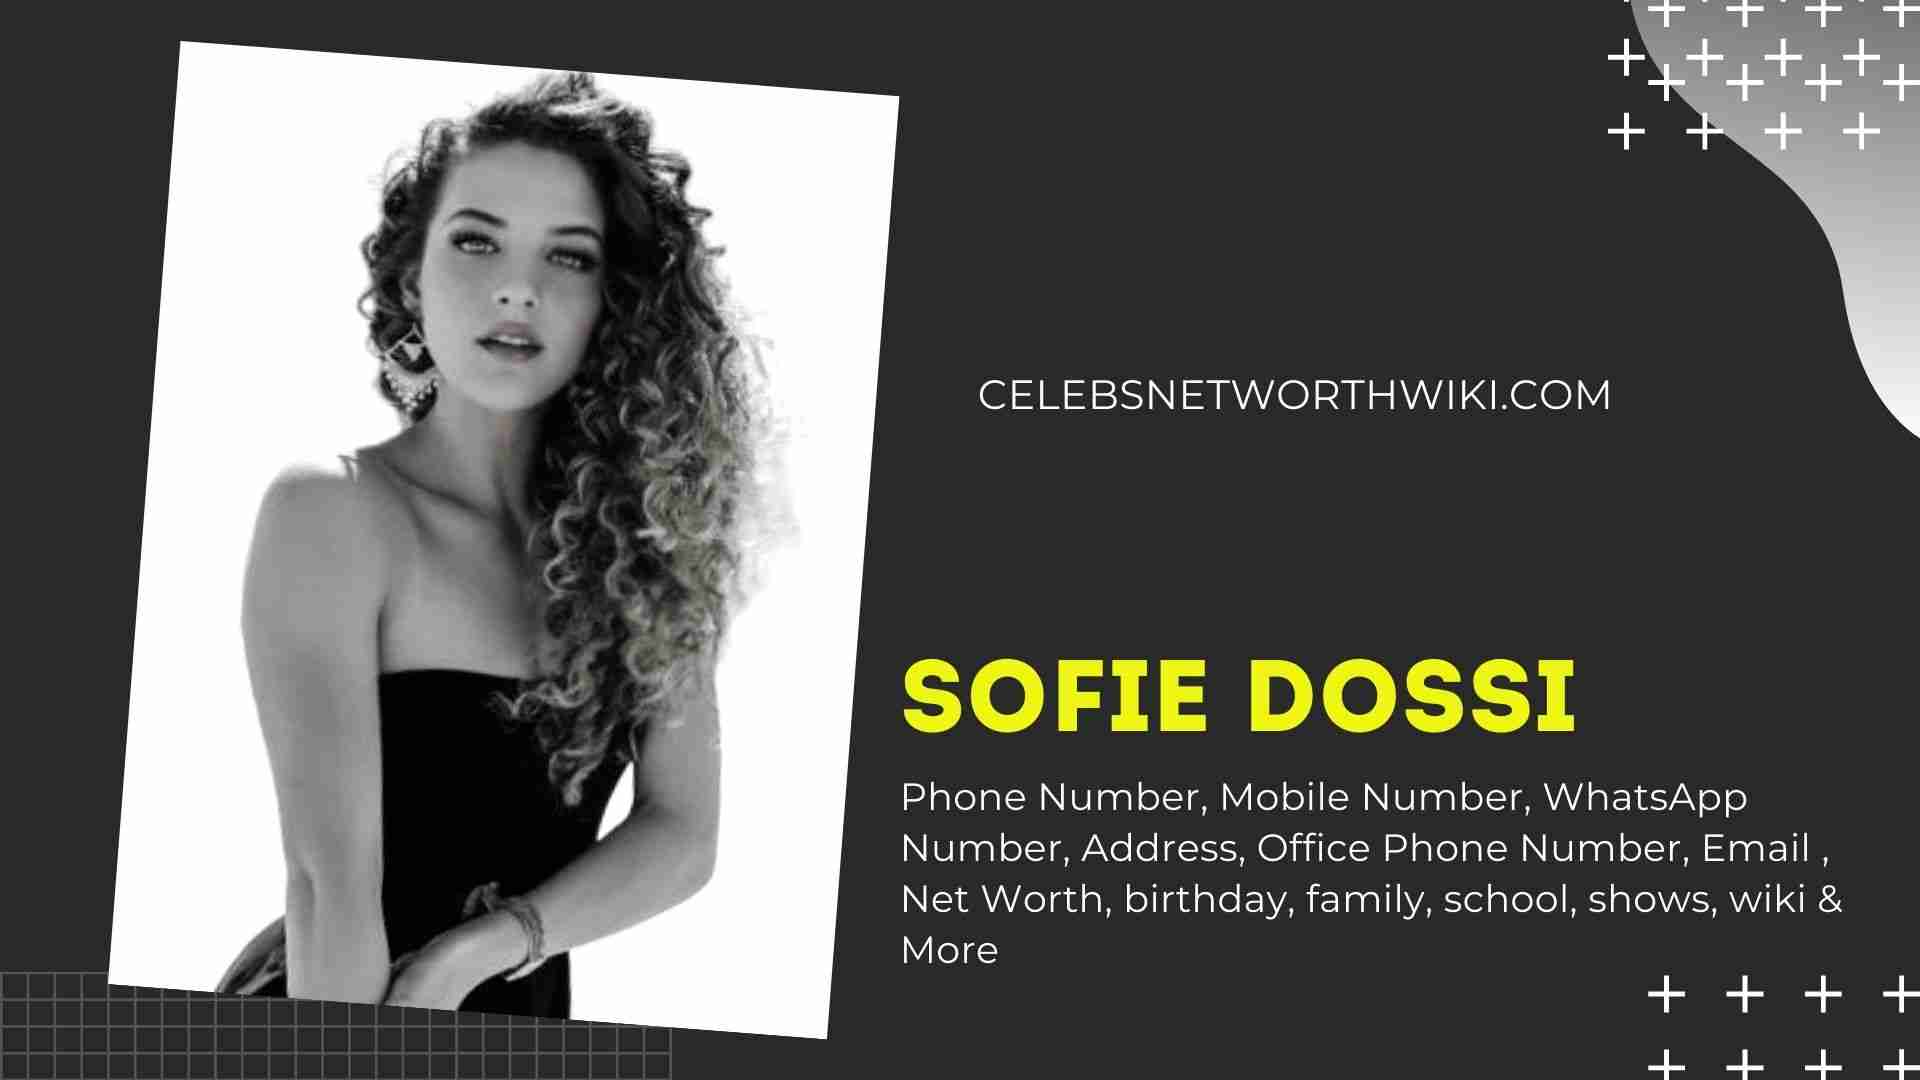 Sofie Dossi Phone Number Texting Number Contact Number Mobile